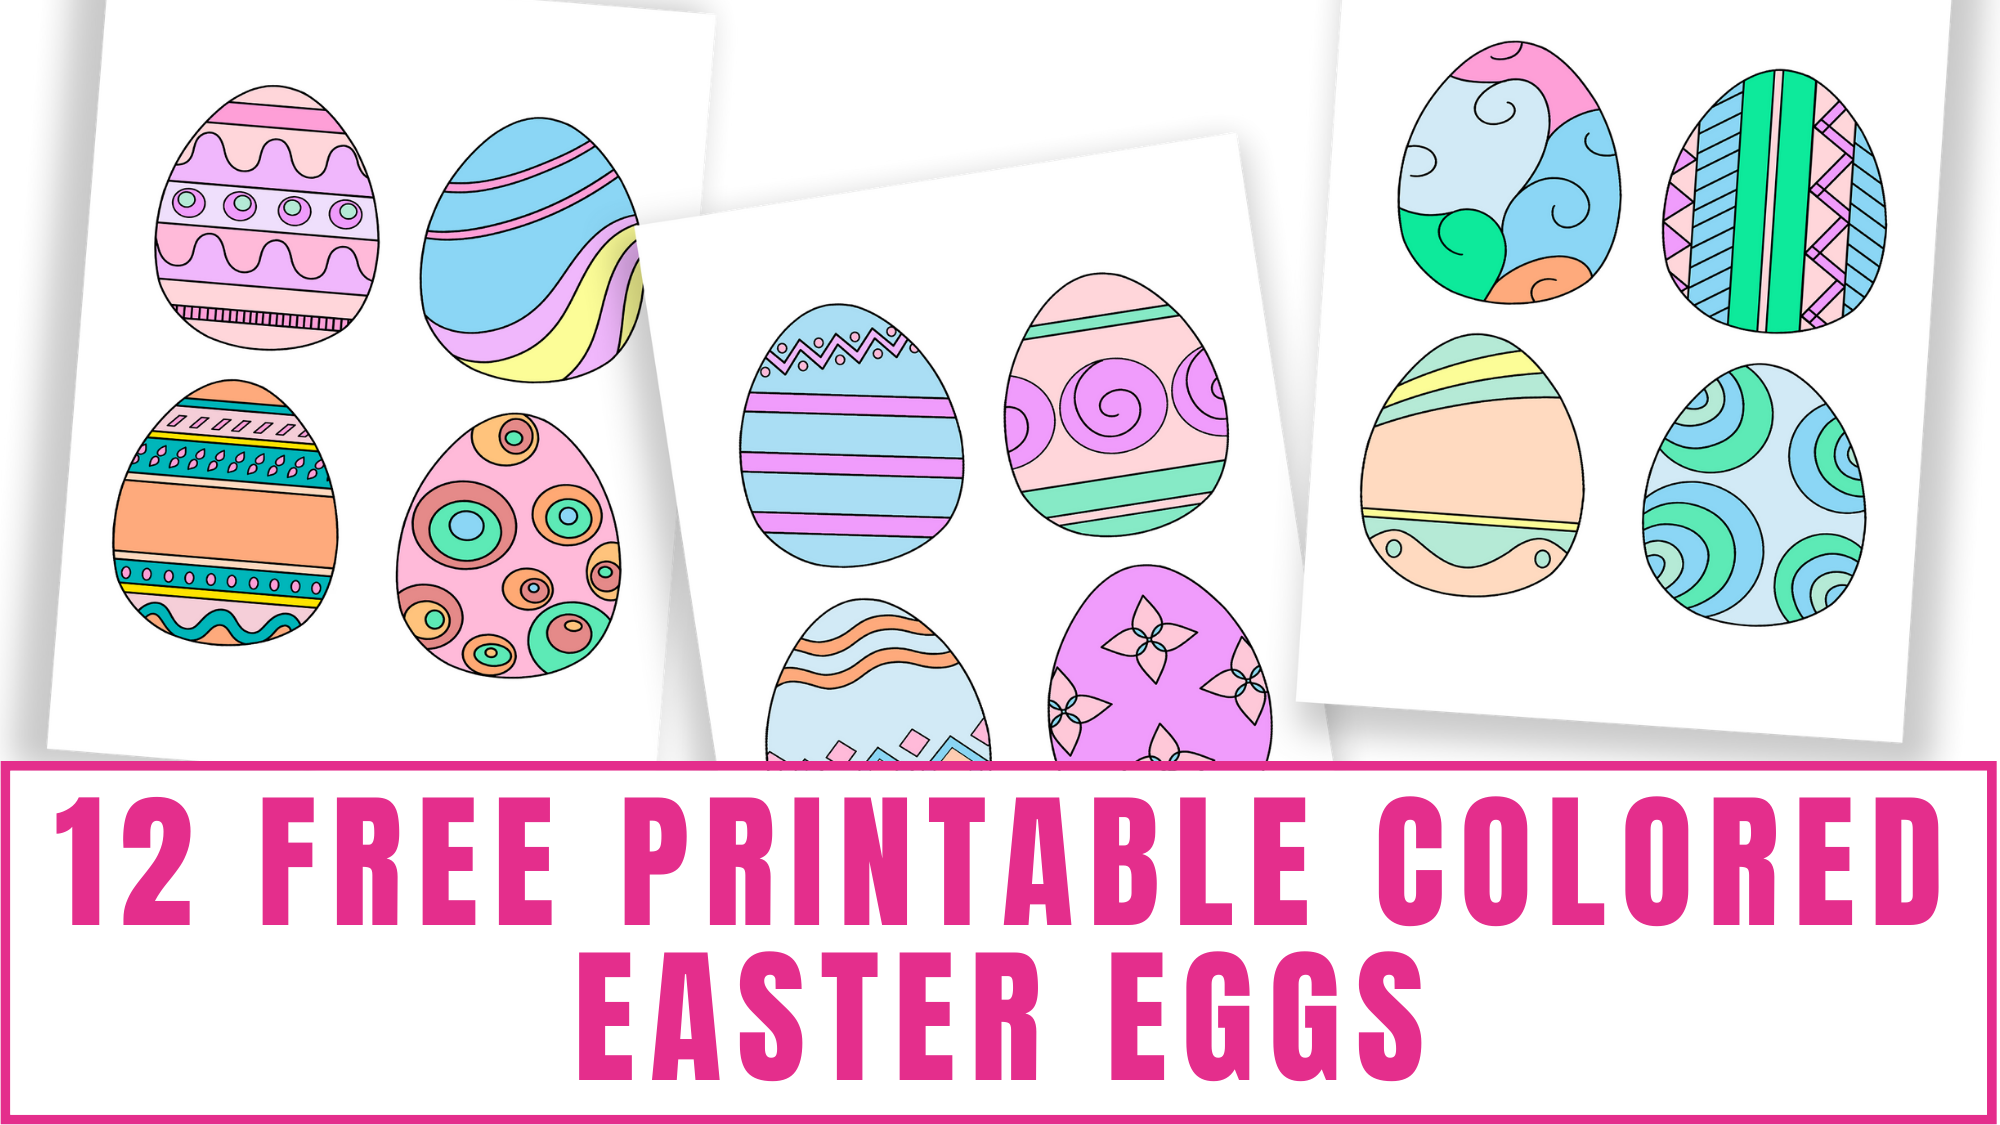 12-free-printable-colored-easter-eggs-freebie-finding-mom-fillable